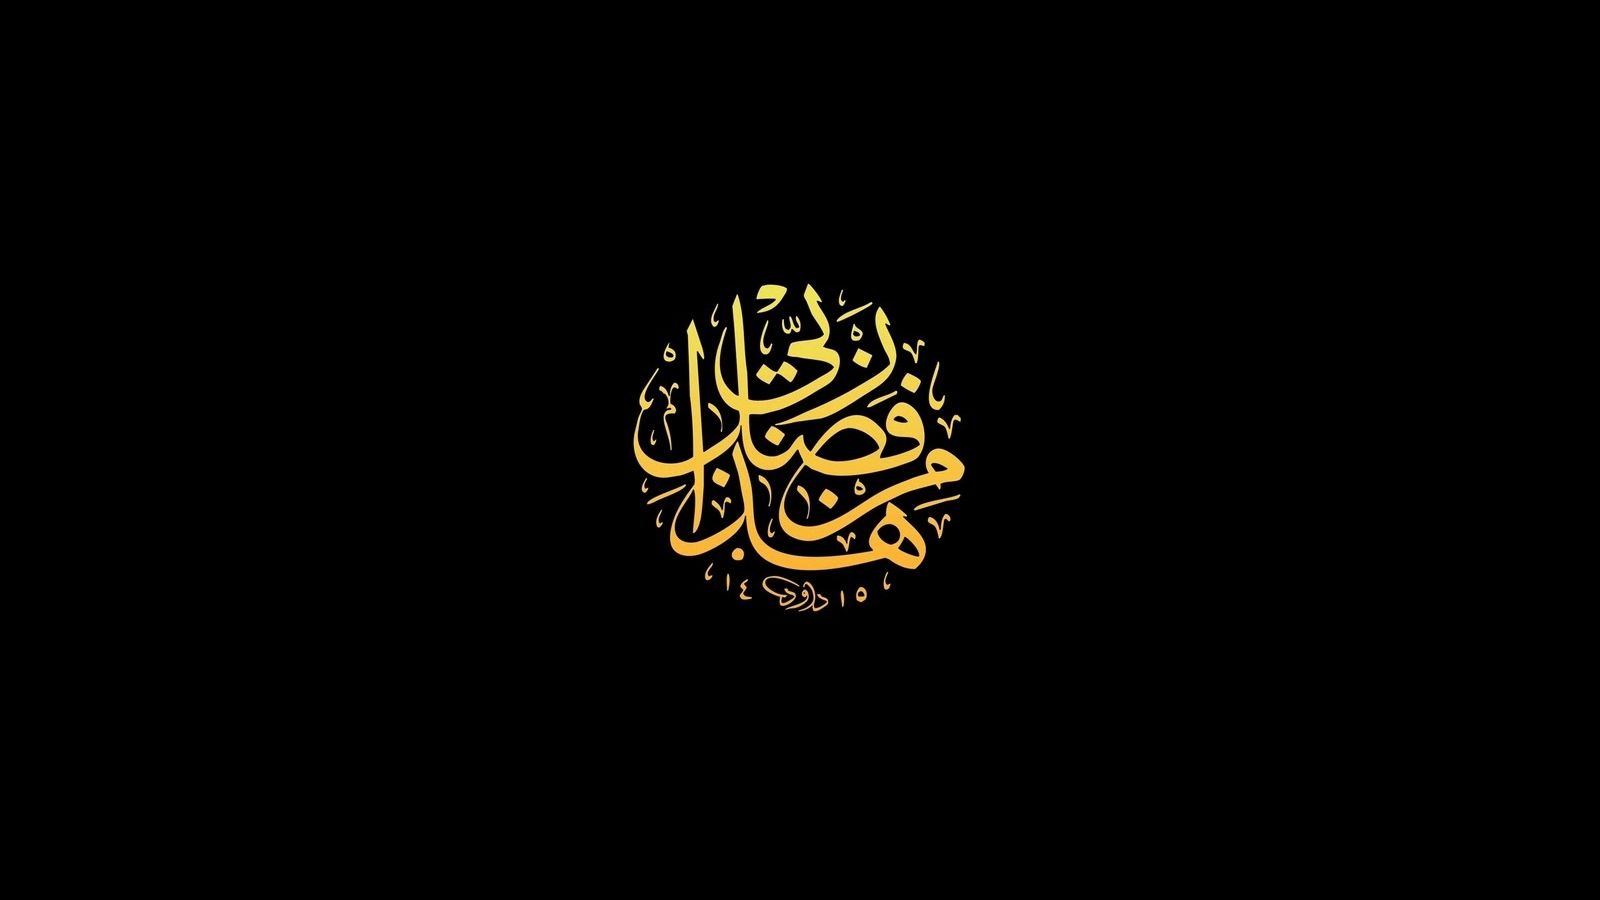 Free download Islamic Calligraphic Wallpaper Islamic Quotes About